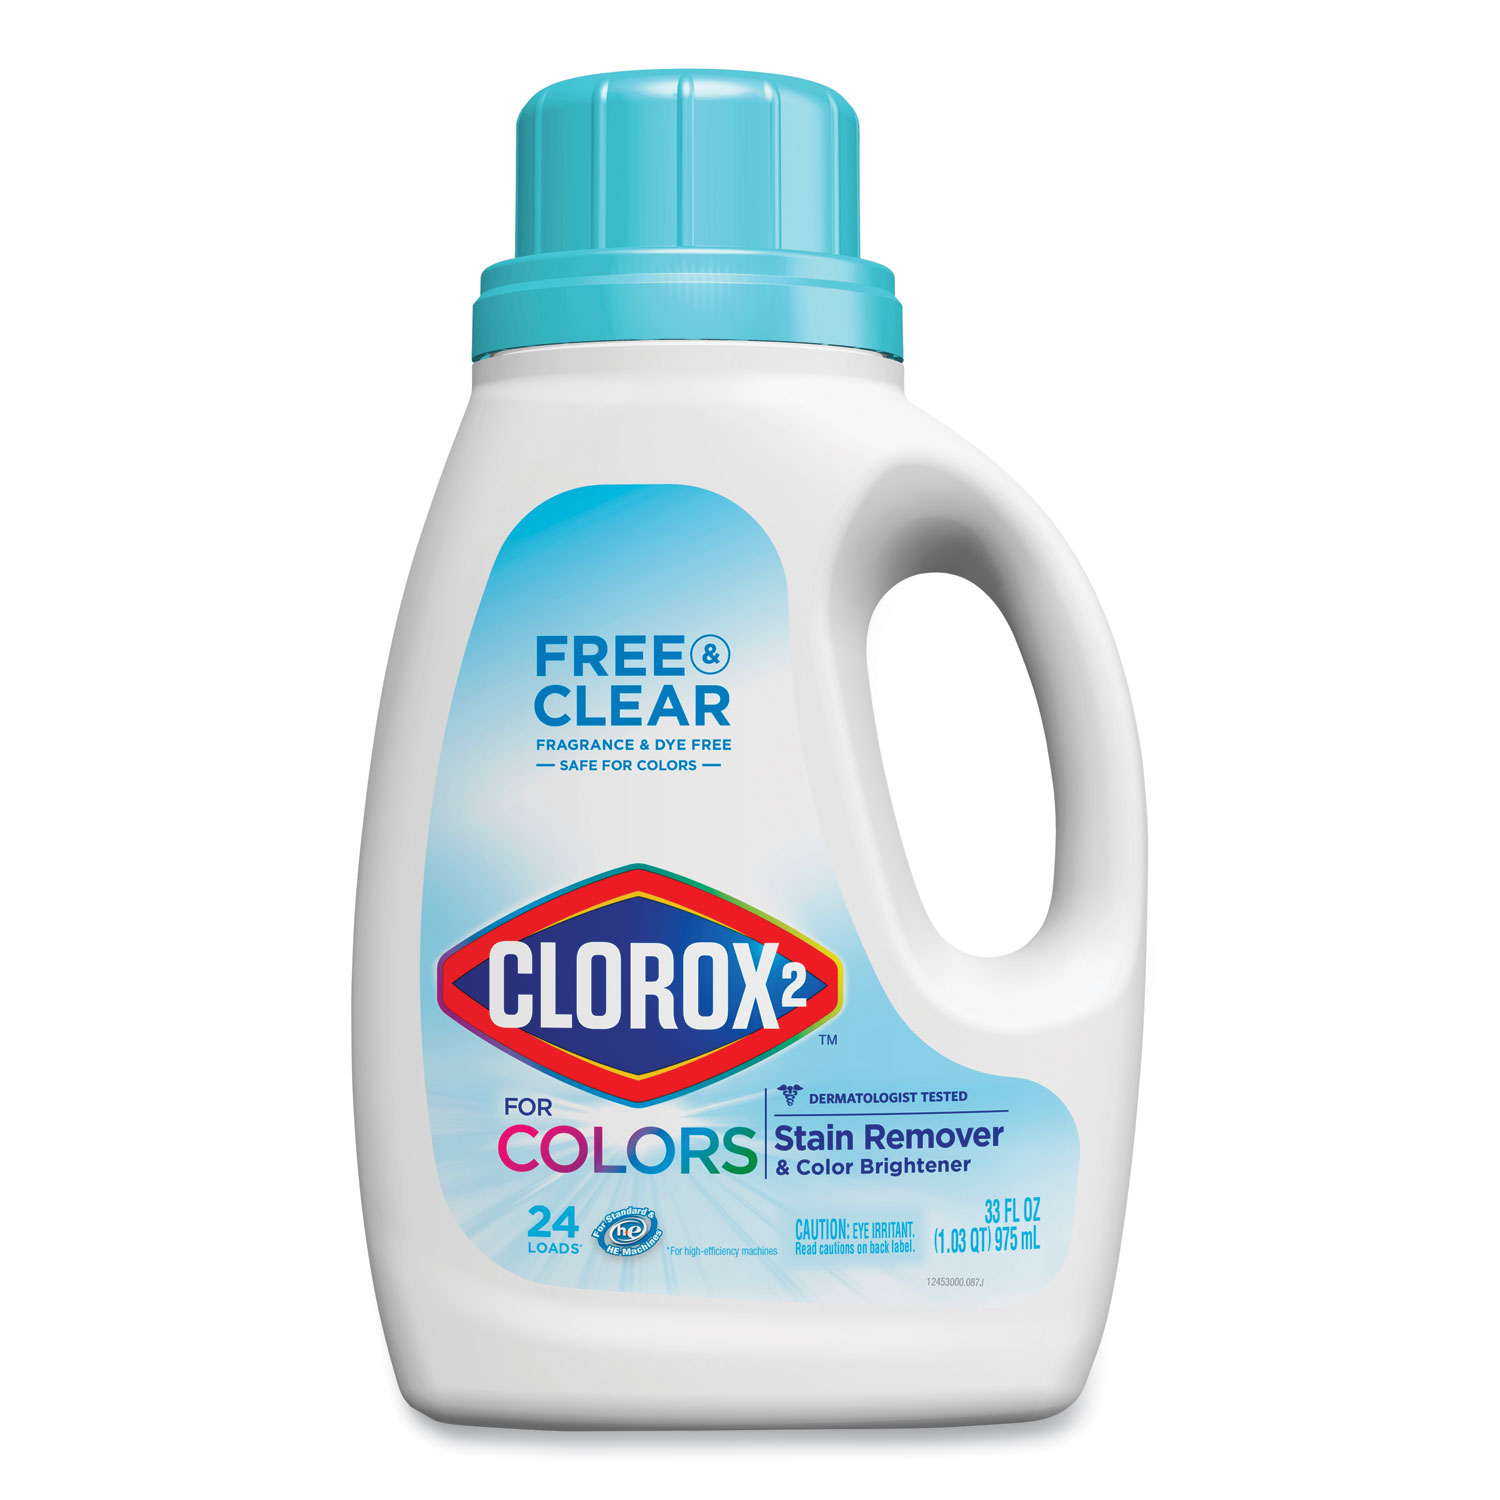  Clorox 2 CLO30046CT Stain Remover and Color Booster, Unscented, 33 oz Bottle, 6/Carton (CLO30046CT) 